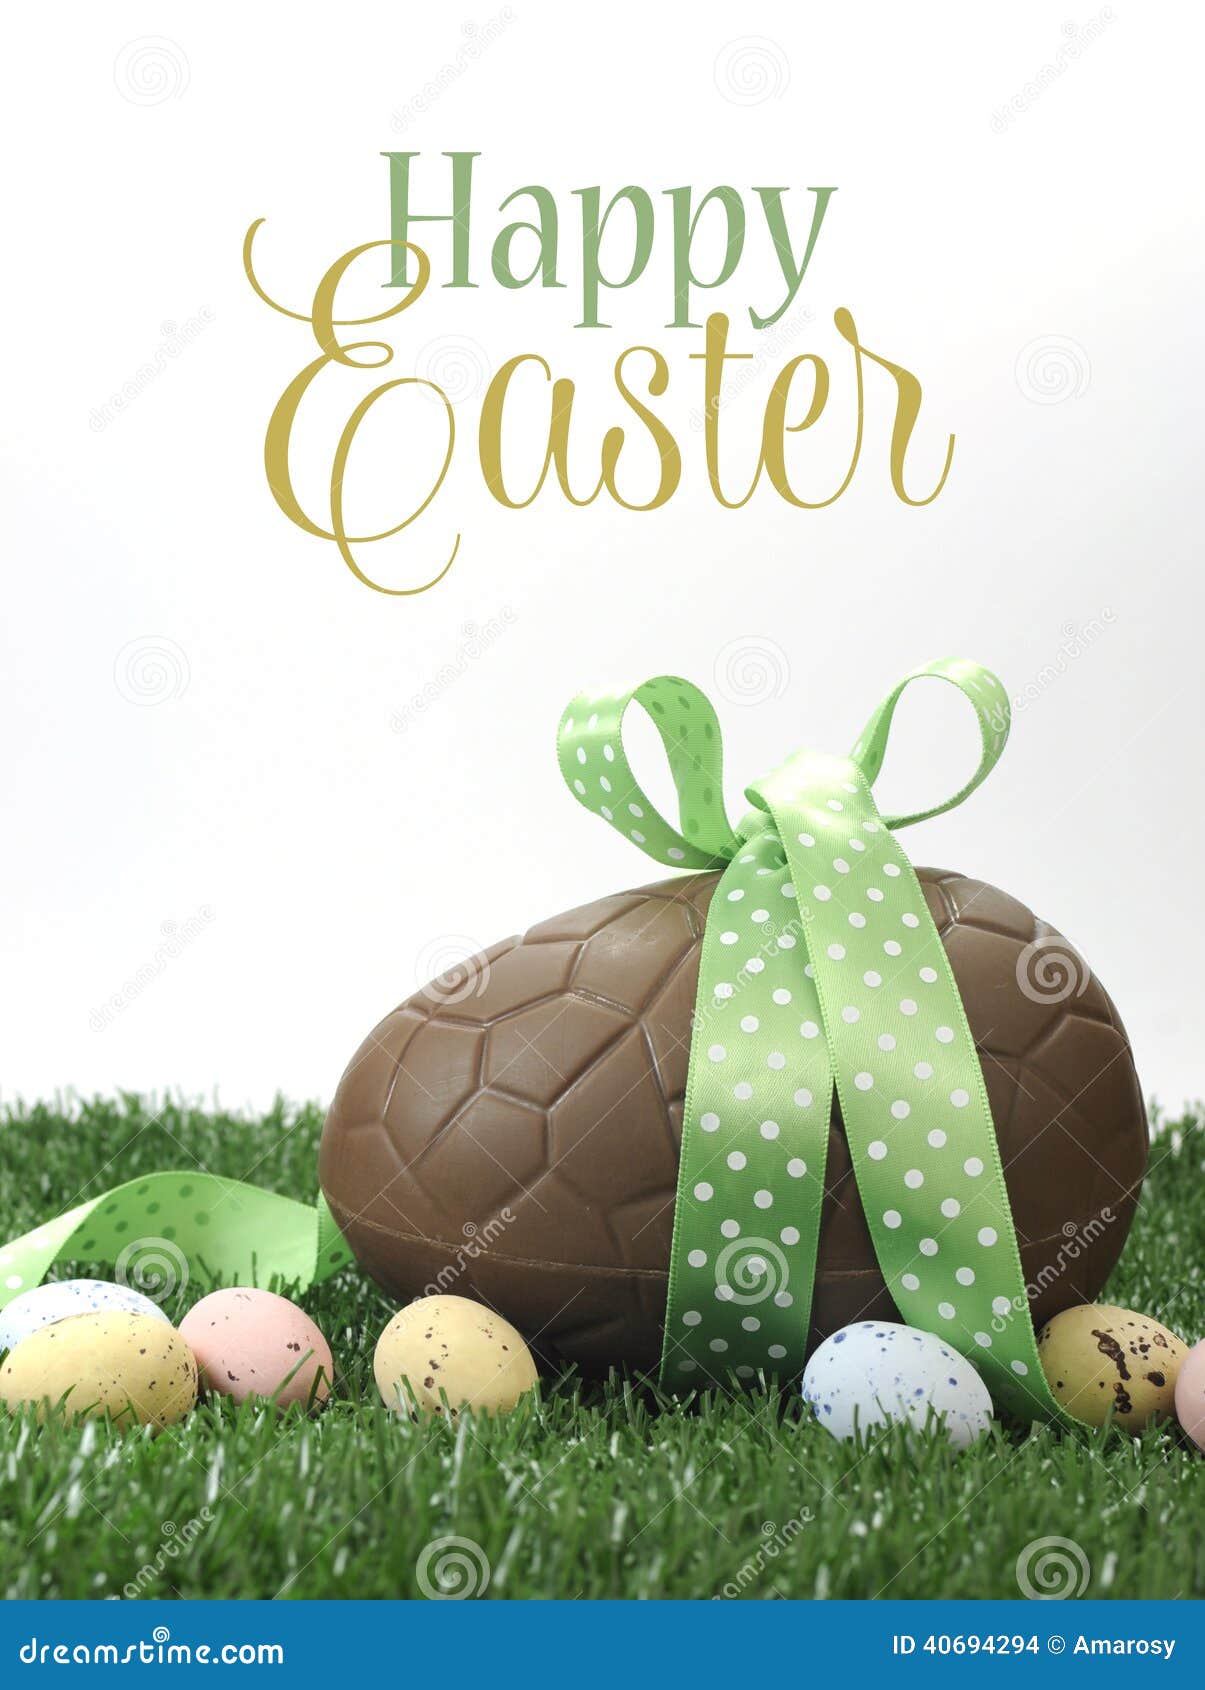 happy easter large chocolate easter egg with sample text